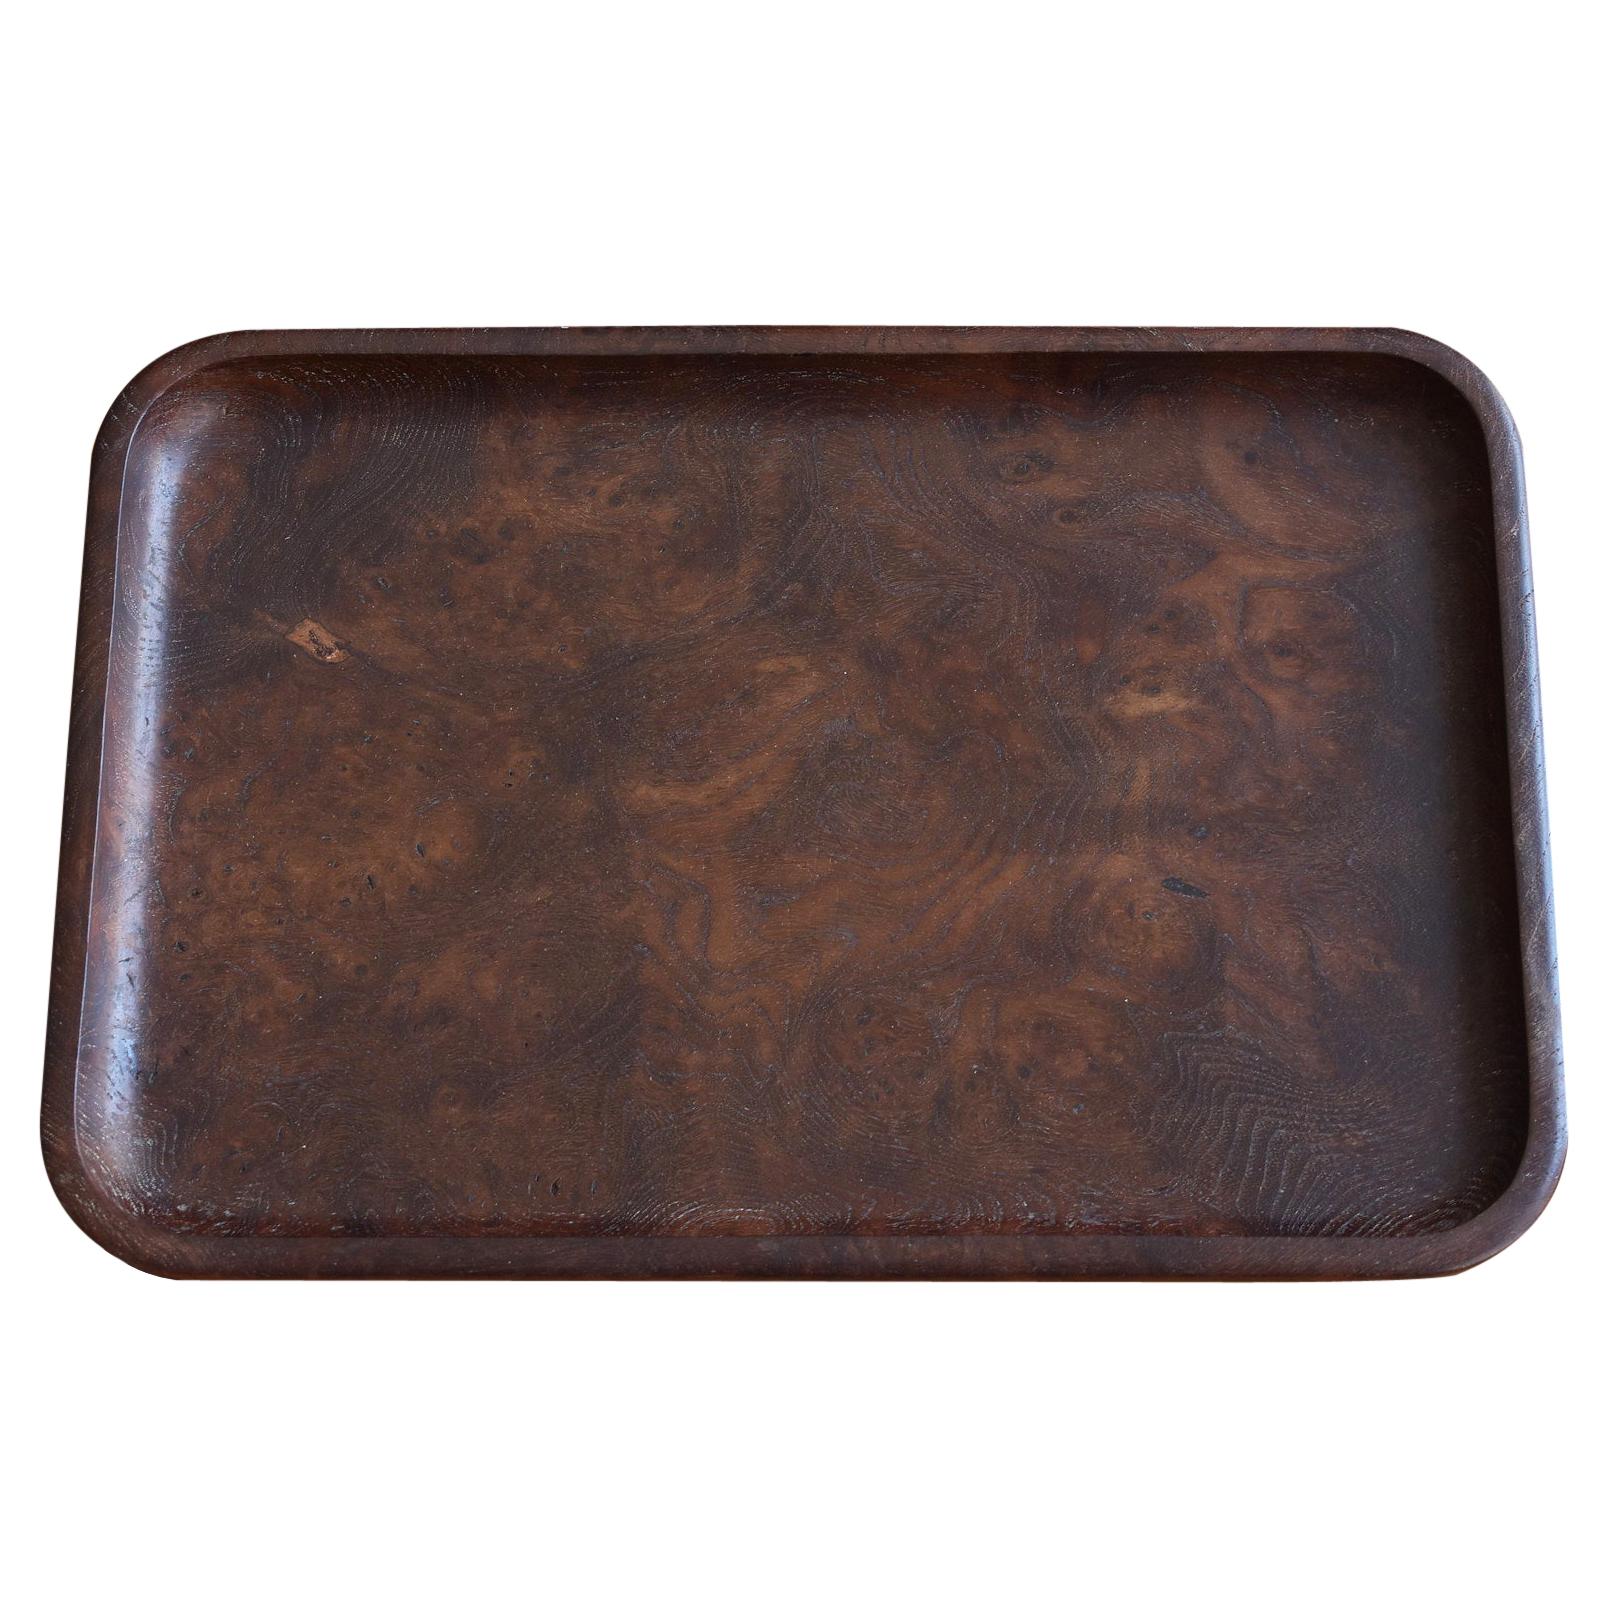 Luxury Japanese Old Trays Made of Mulberry Wood / Vintage Wooden Trays / Showa